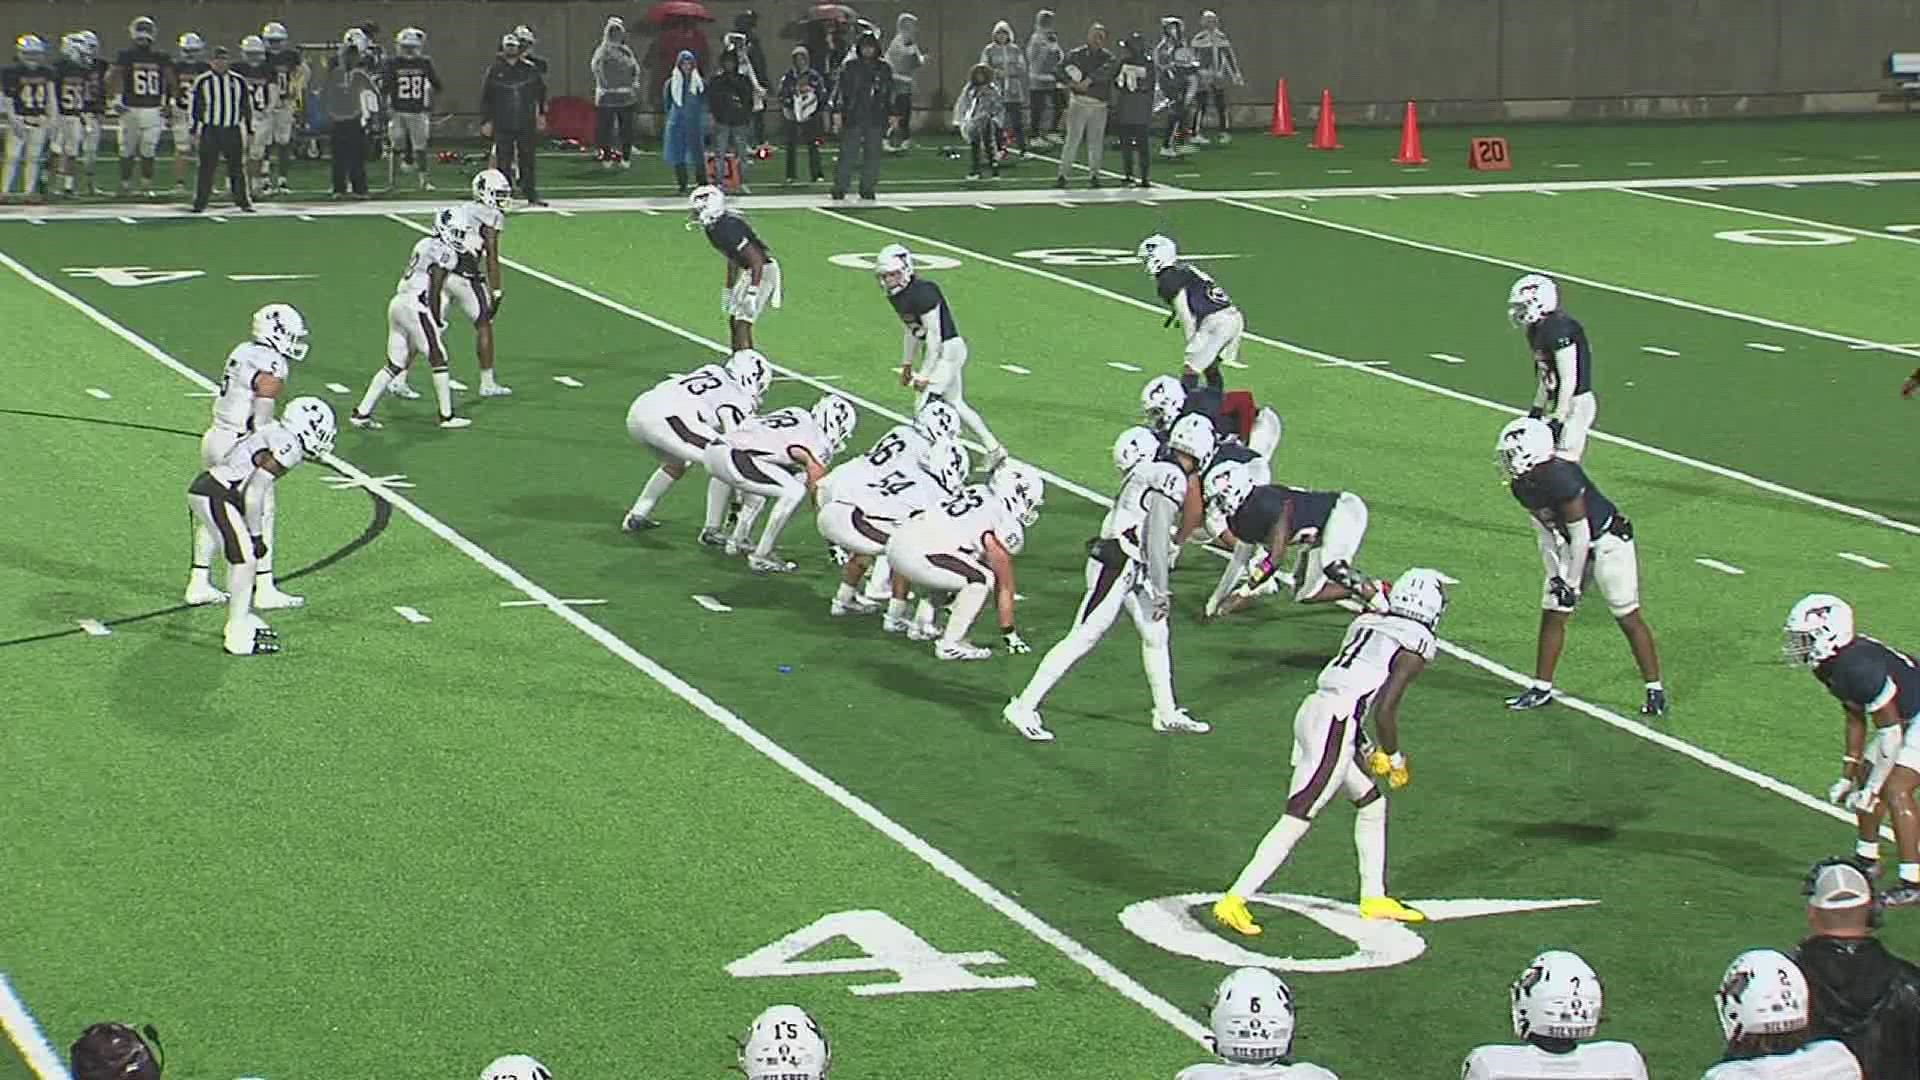 Undefeated Silsbee rolls into 4A-DII State Quarterfinals